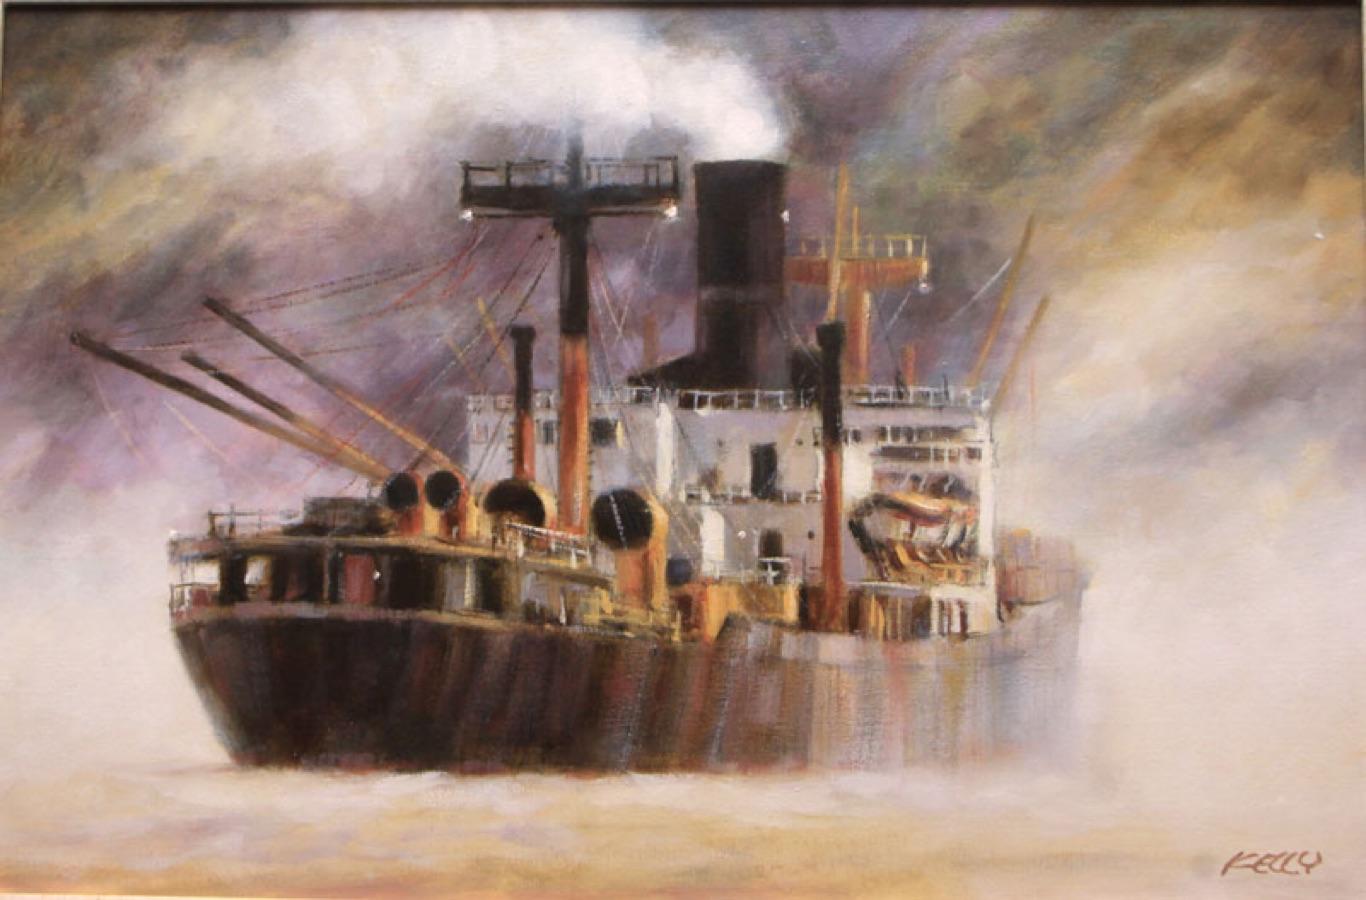 Tramp Steamer-Framed Original Oil on Canvas, Signed by Artist - Painting by John Kelly